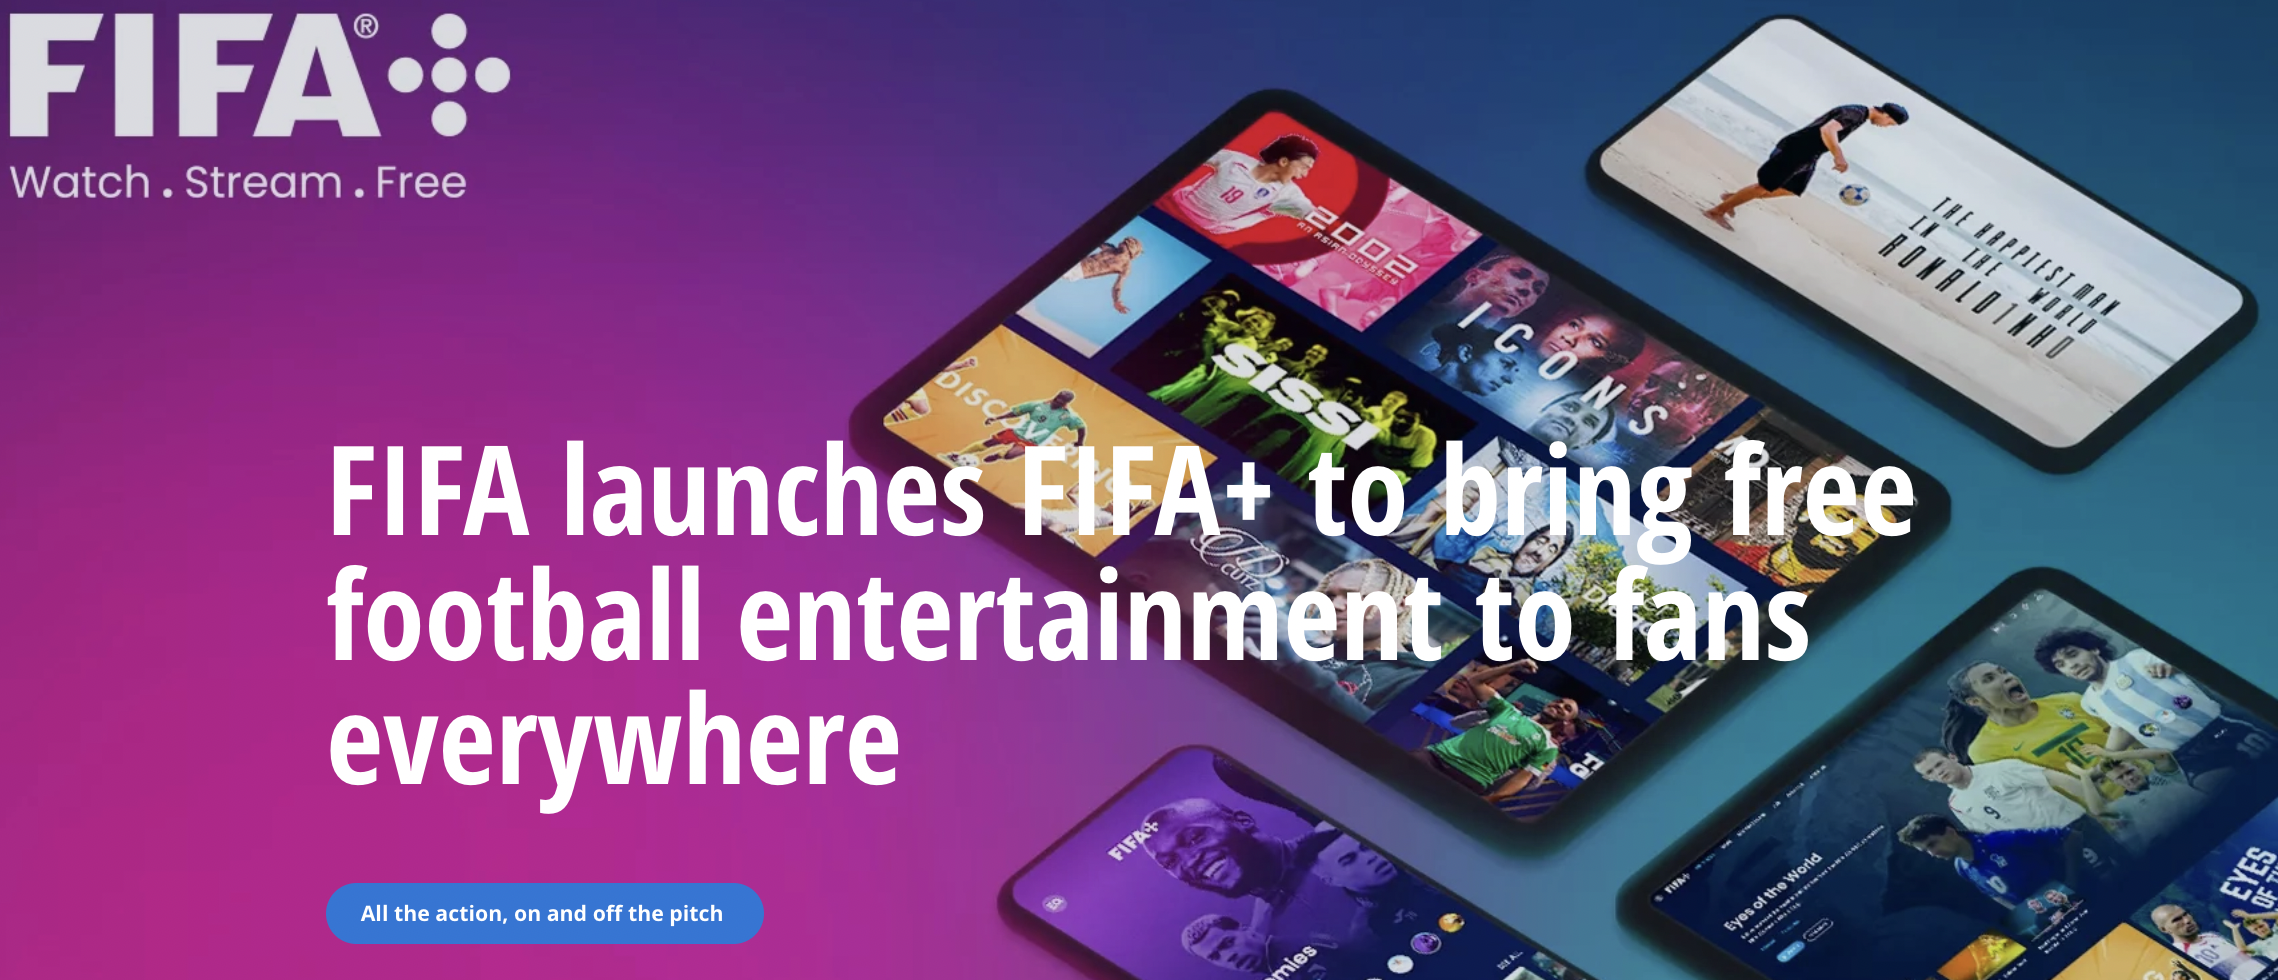 FIFA Launches FIFA+, A Free Football Streaming Service